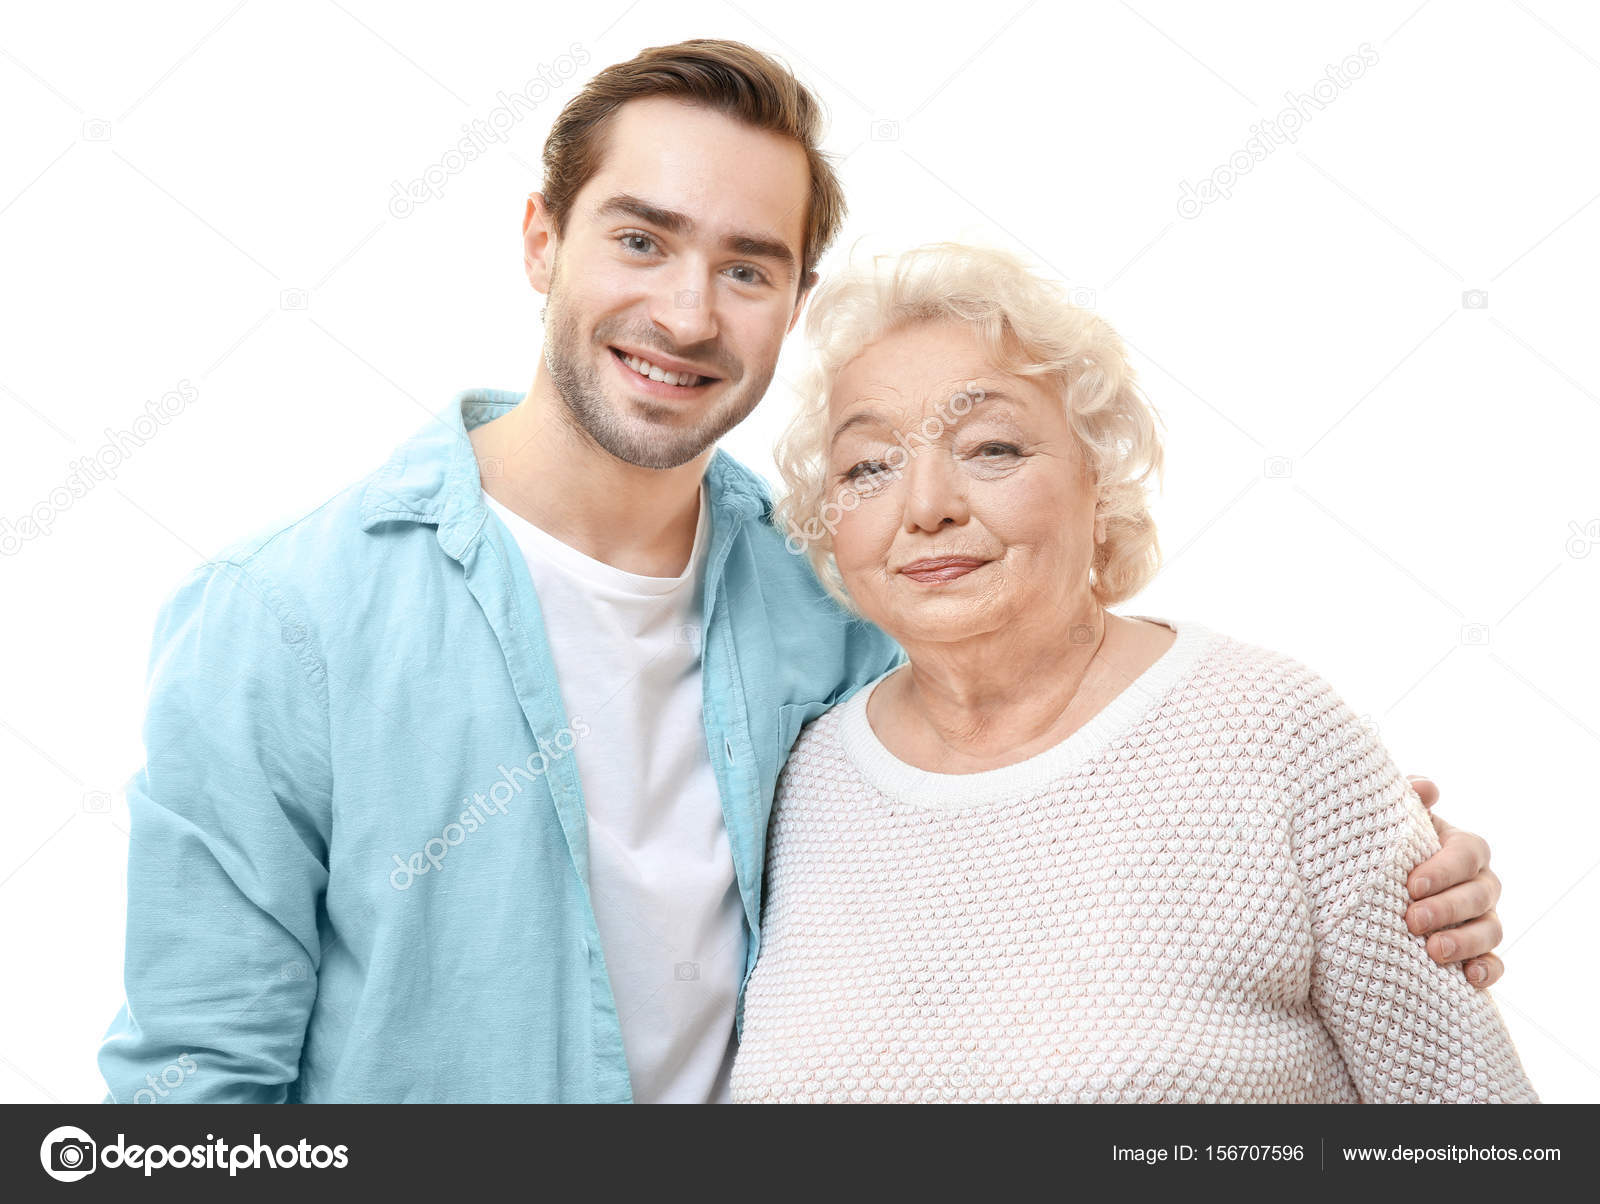 Young man with grandmother — Stock Photo © belchonock #156707596